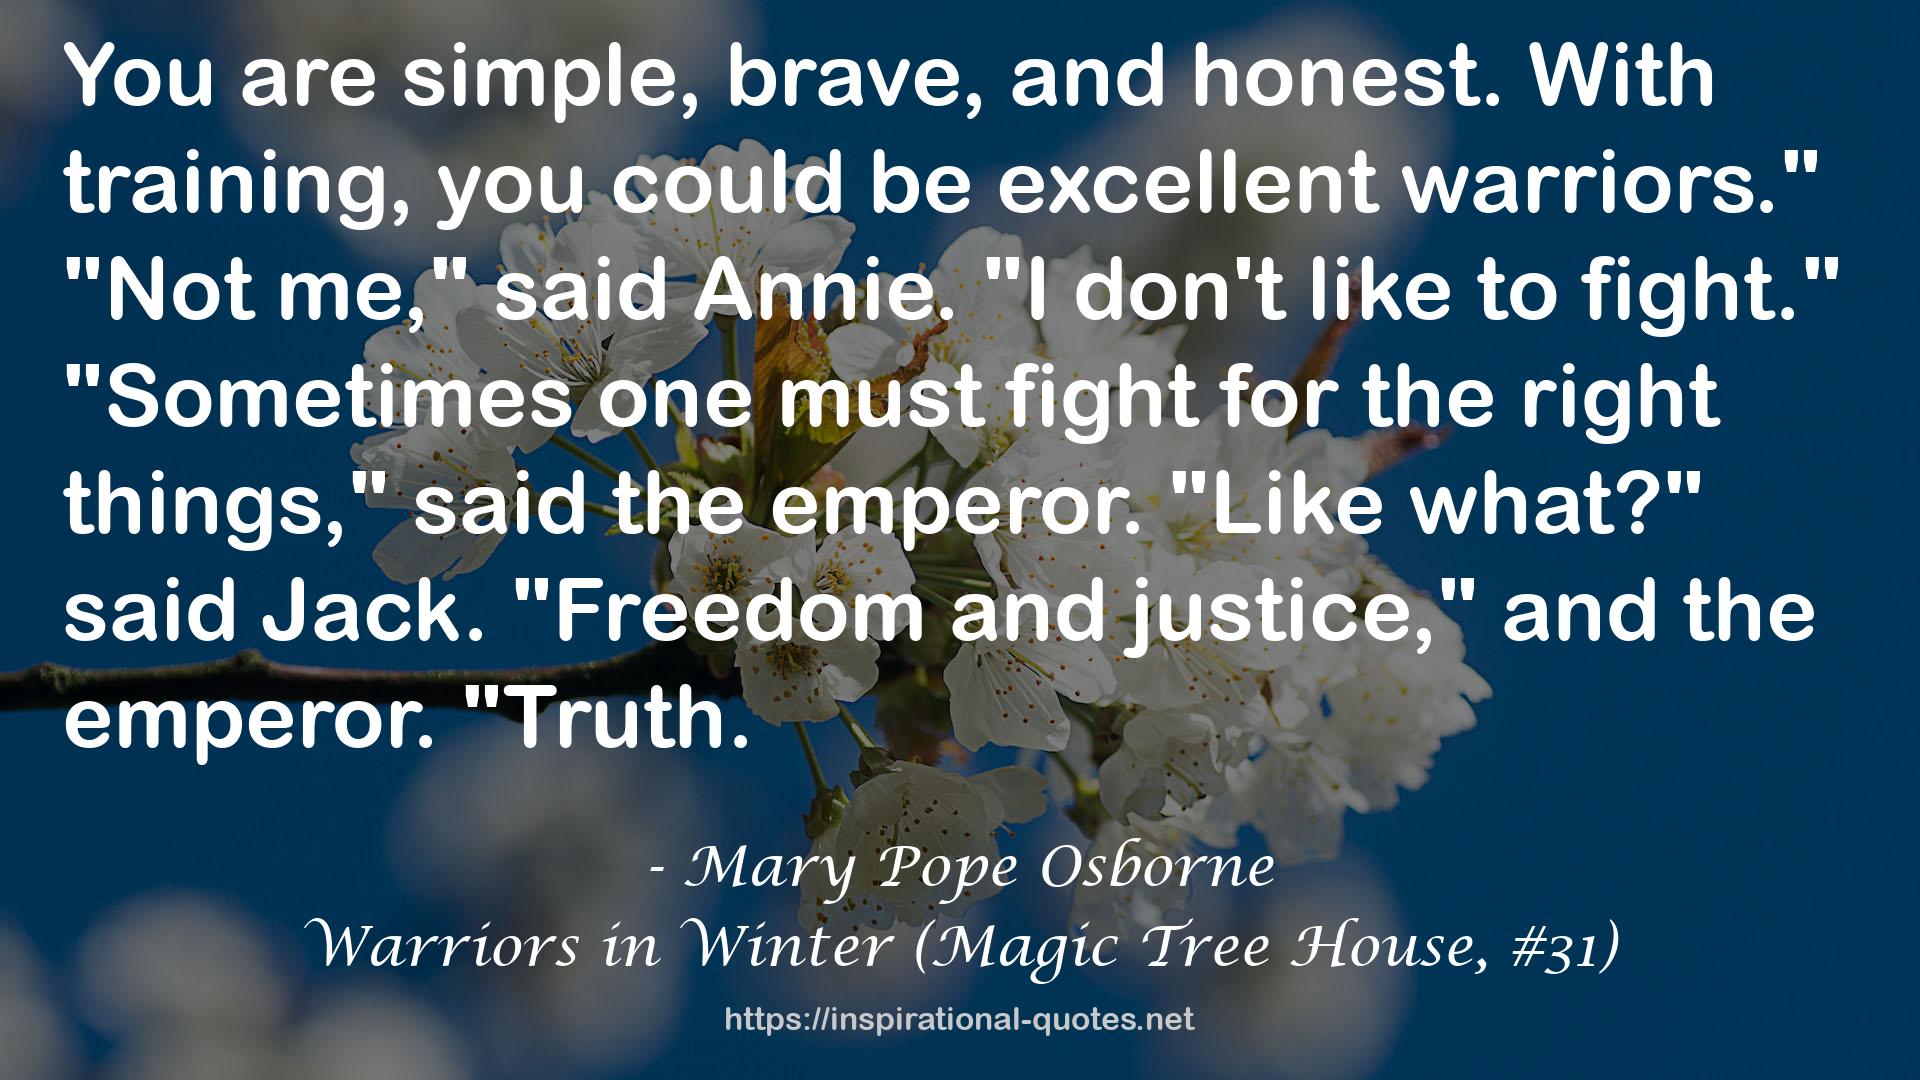 Warriors in Winter (Magic Tree House, #31) QUOTES